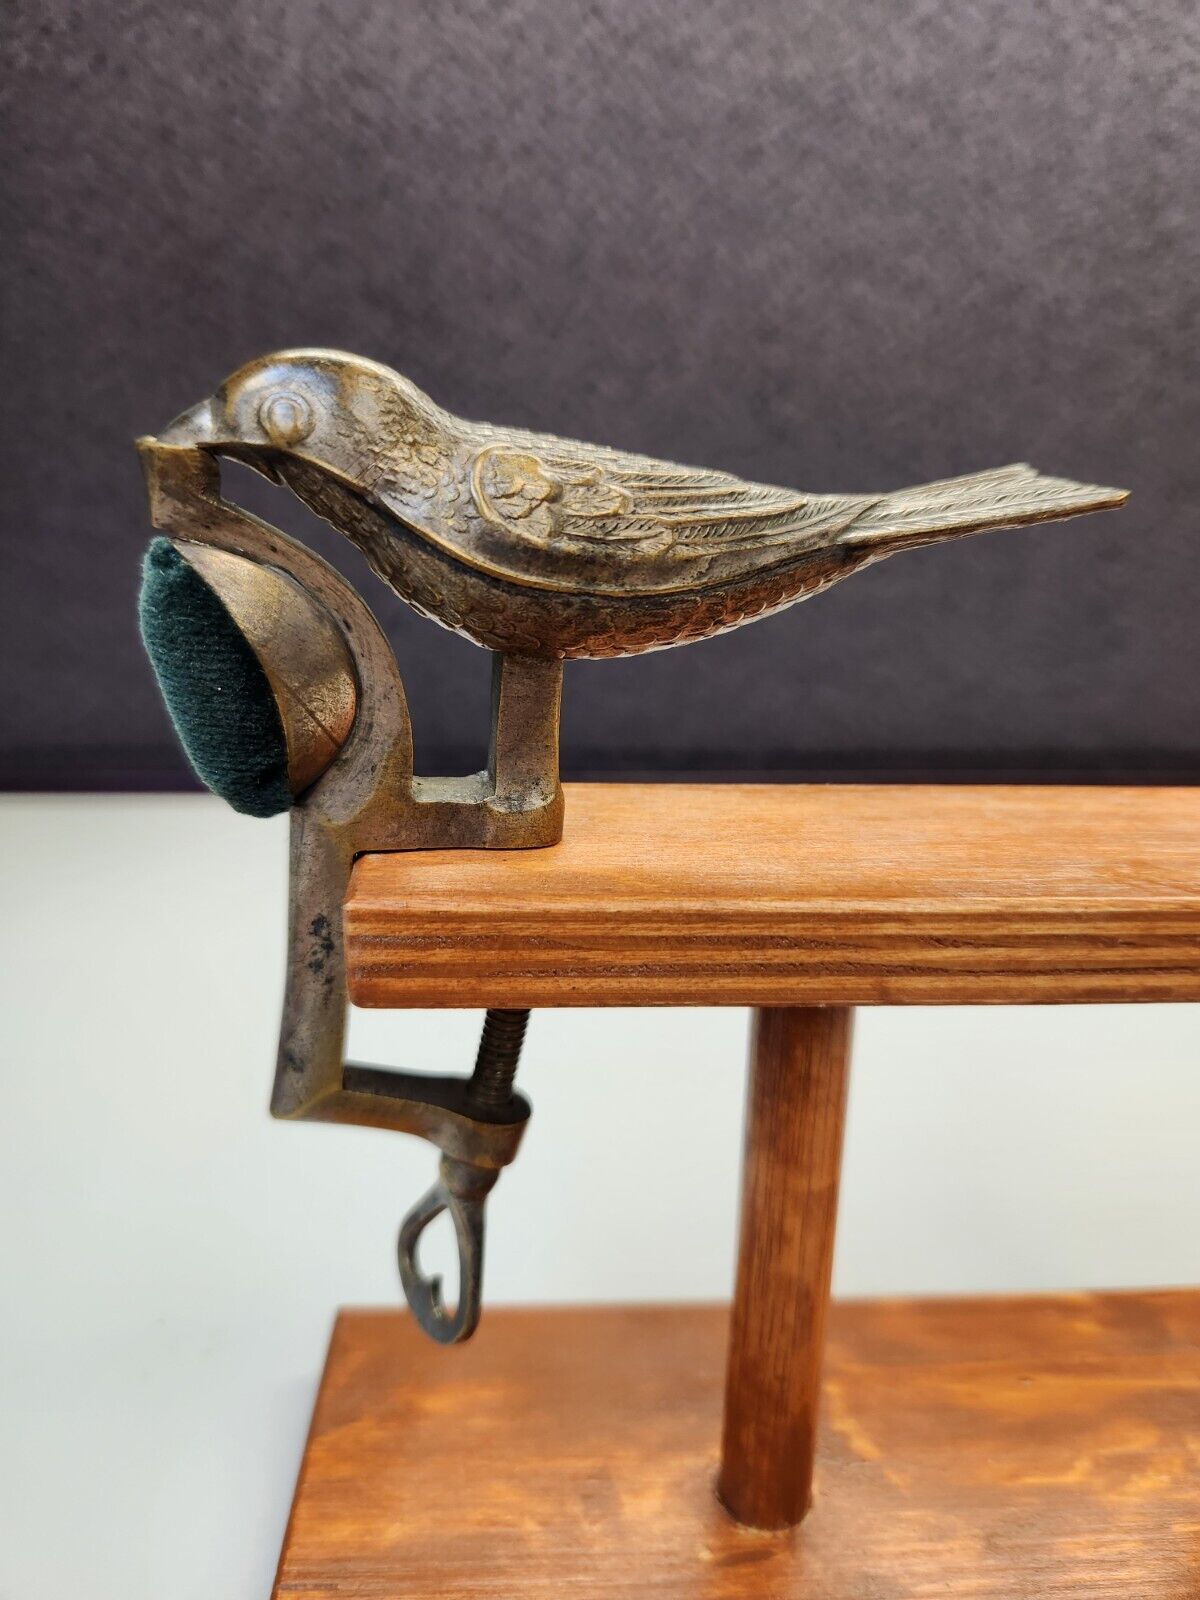 RARE ANTIQUE A. GEROULD & CO., PATENT SEWING BIRD TABLE CLAMP Teal Pincushion